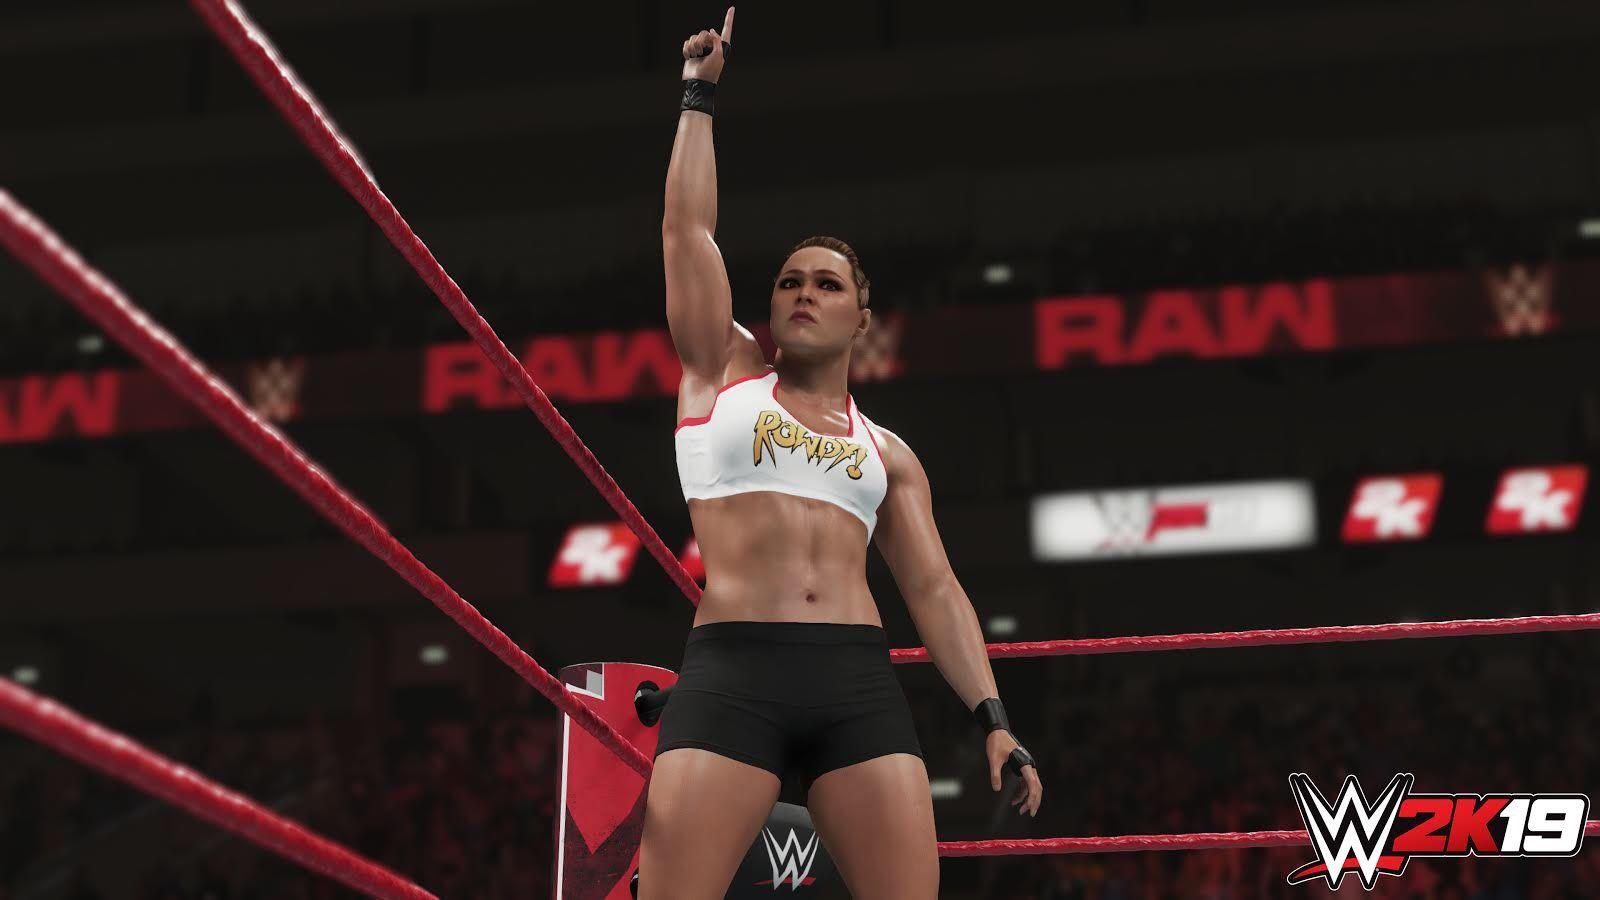 WWE 2K19 Review or Hell No?